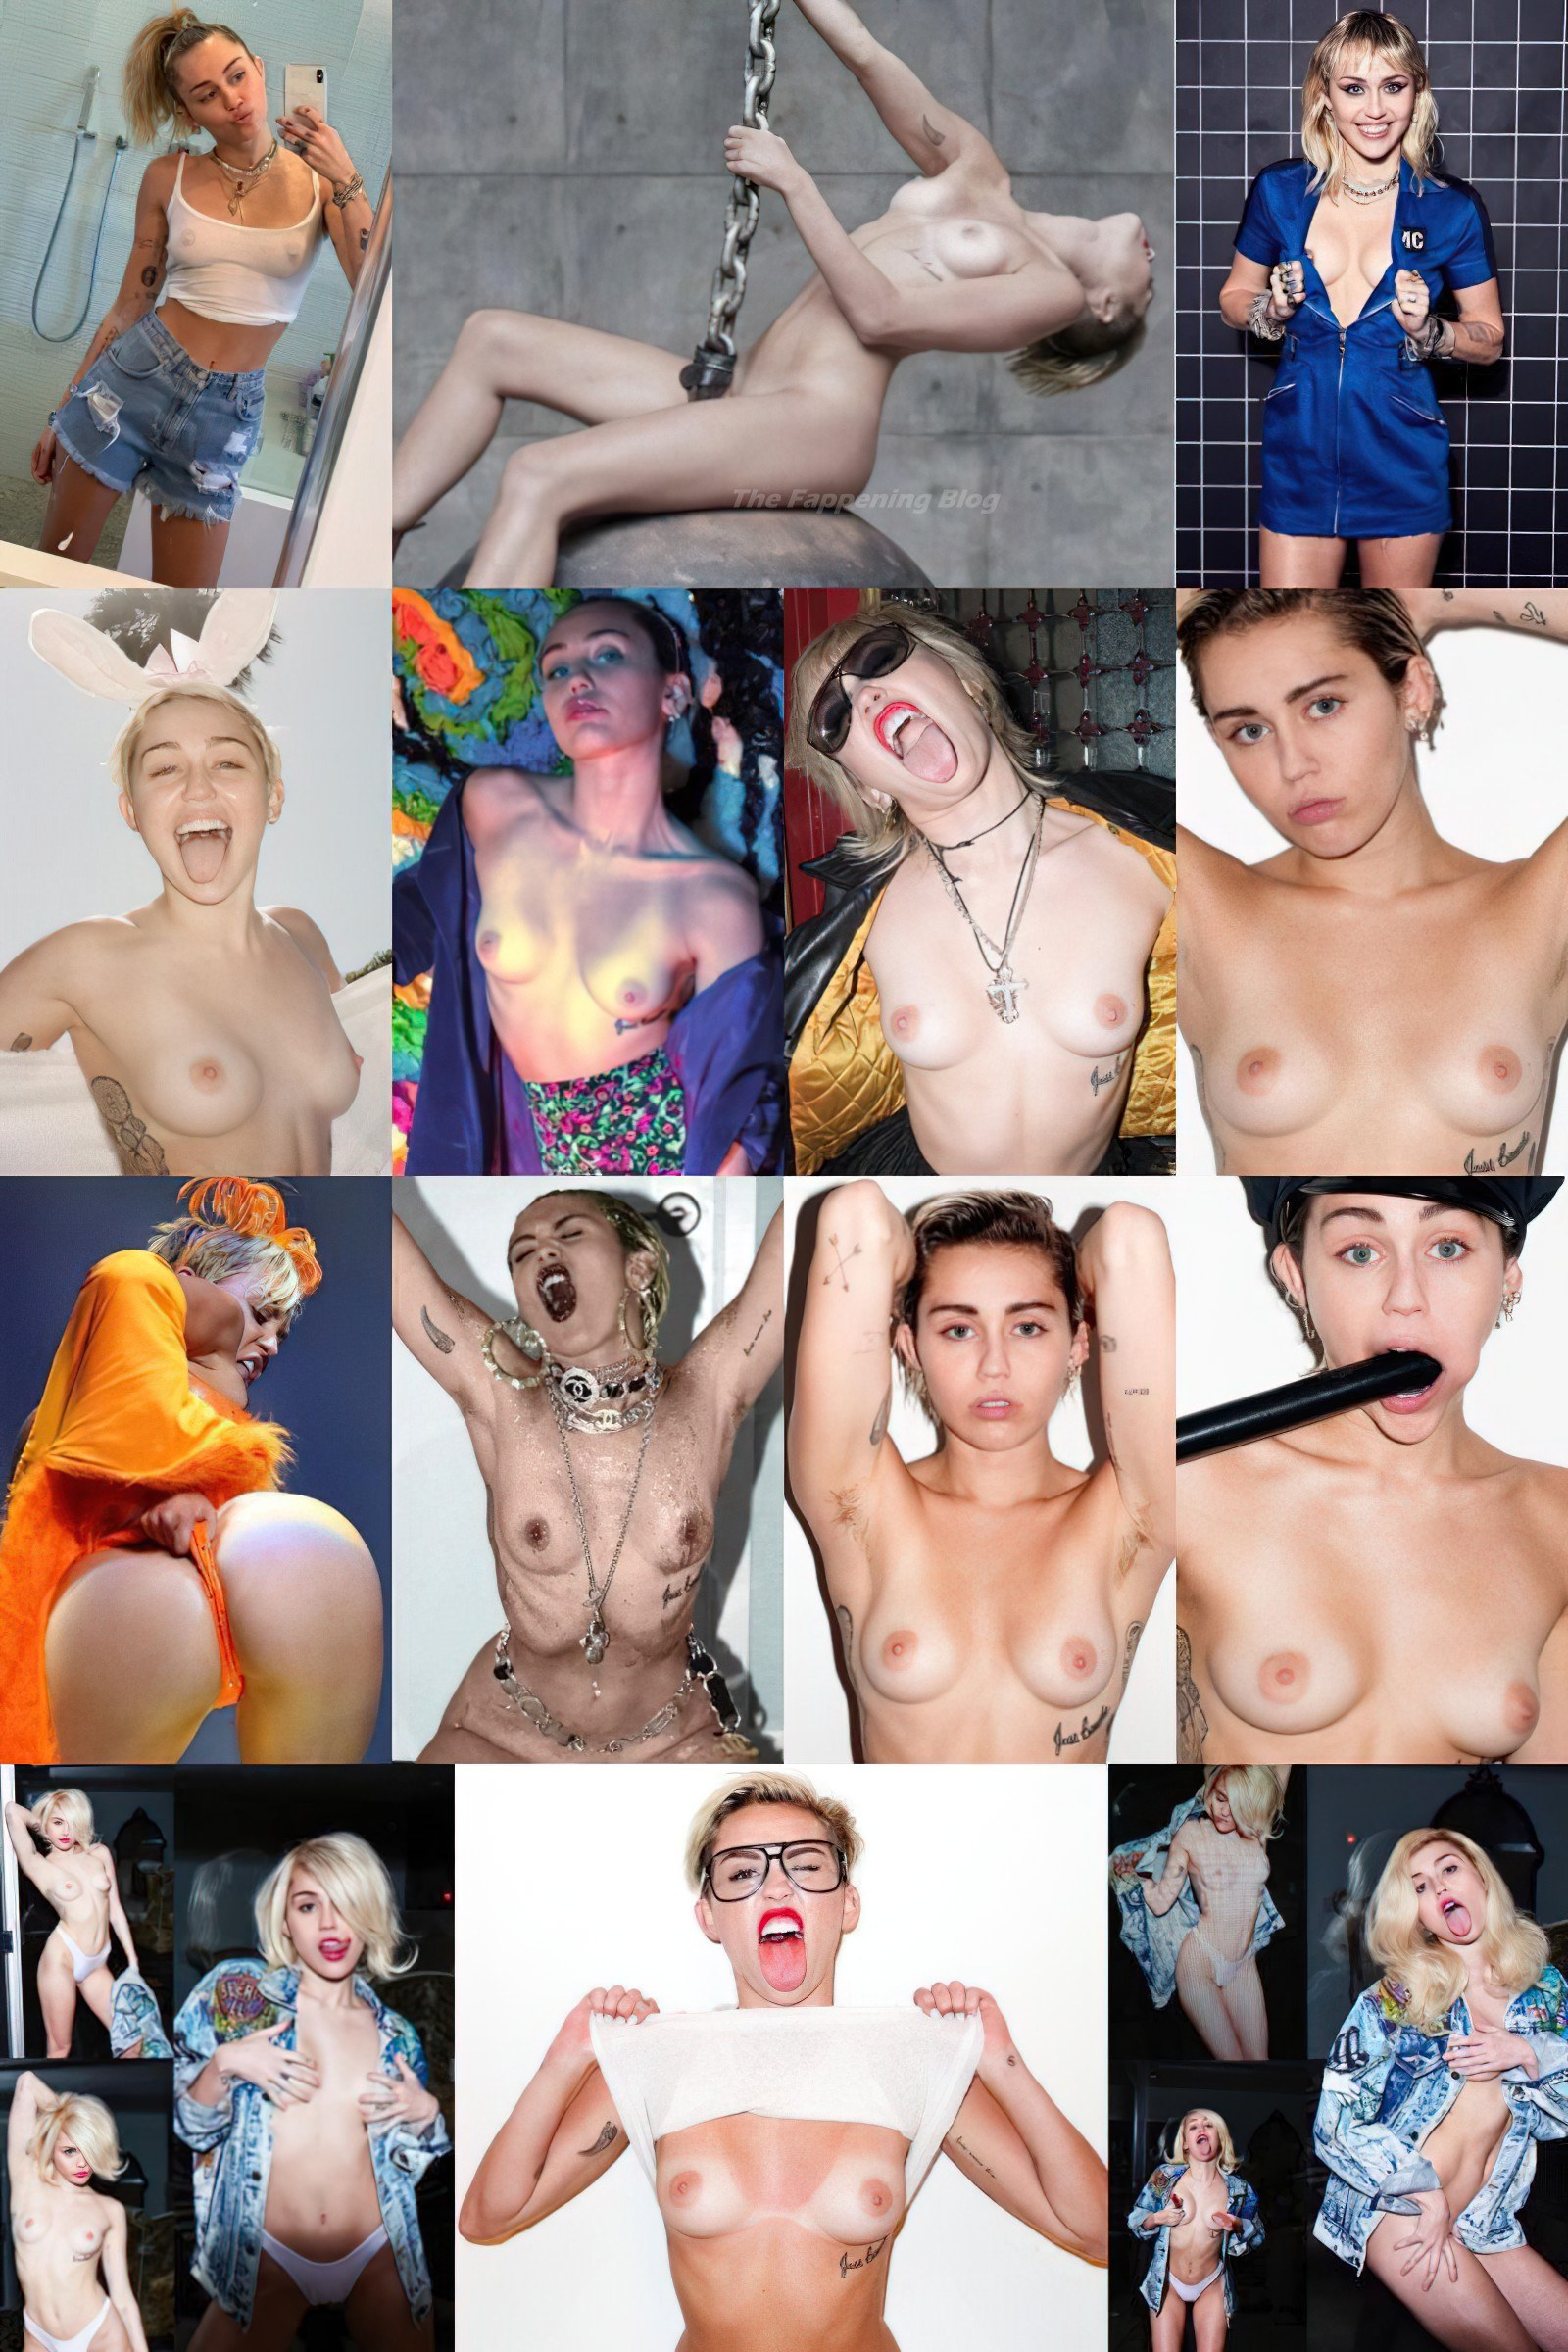 Has miley cyrus ever posed nude